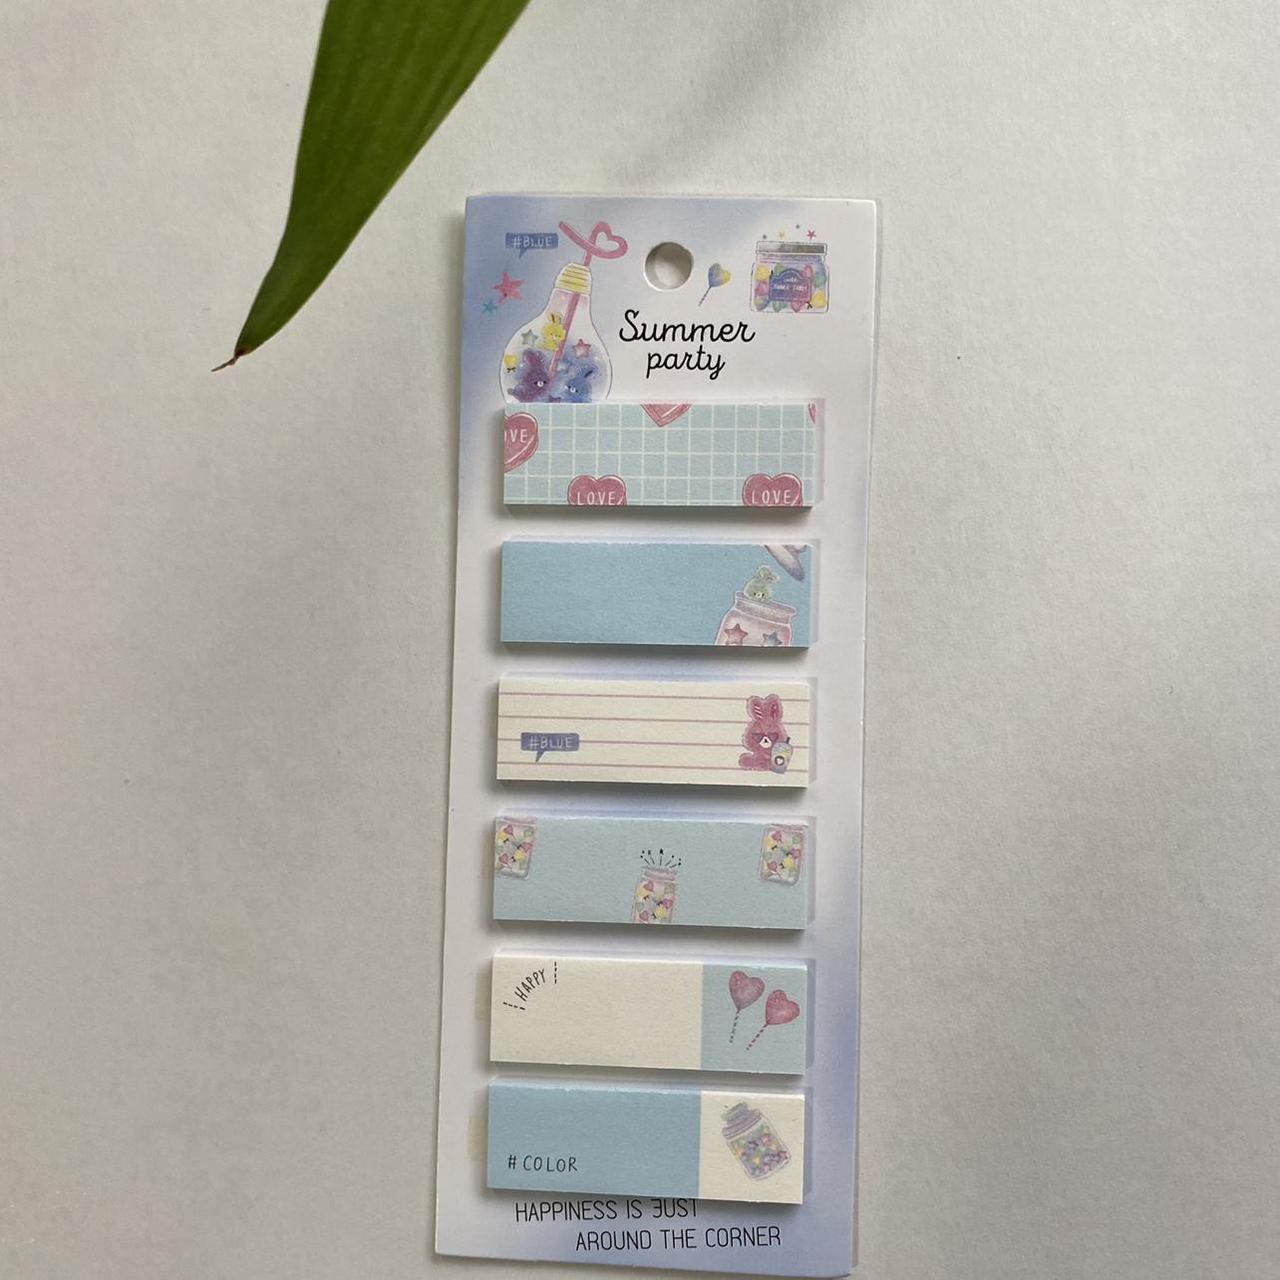 Product Image 2 - Note flags, sticky post-it flags

Can